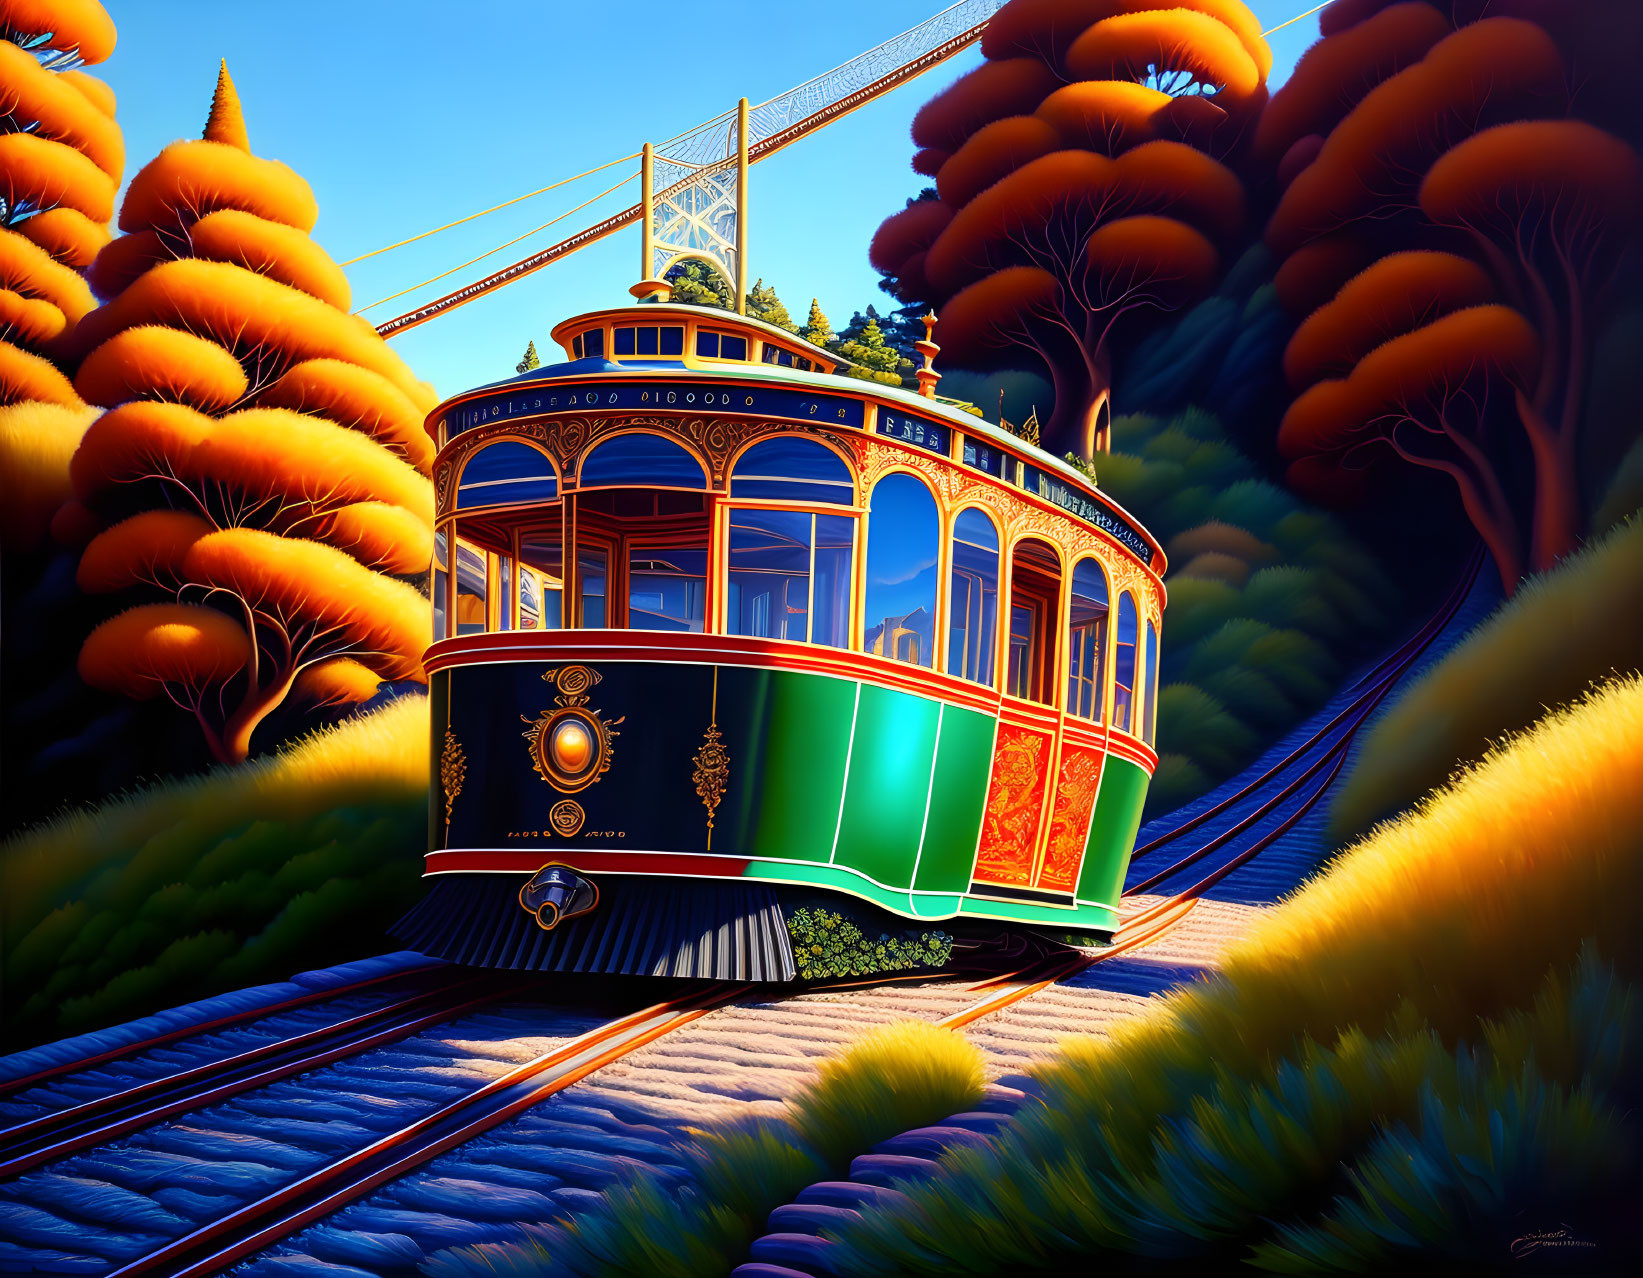 Colorful painting of cable car, trees, bridge under blue sky